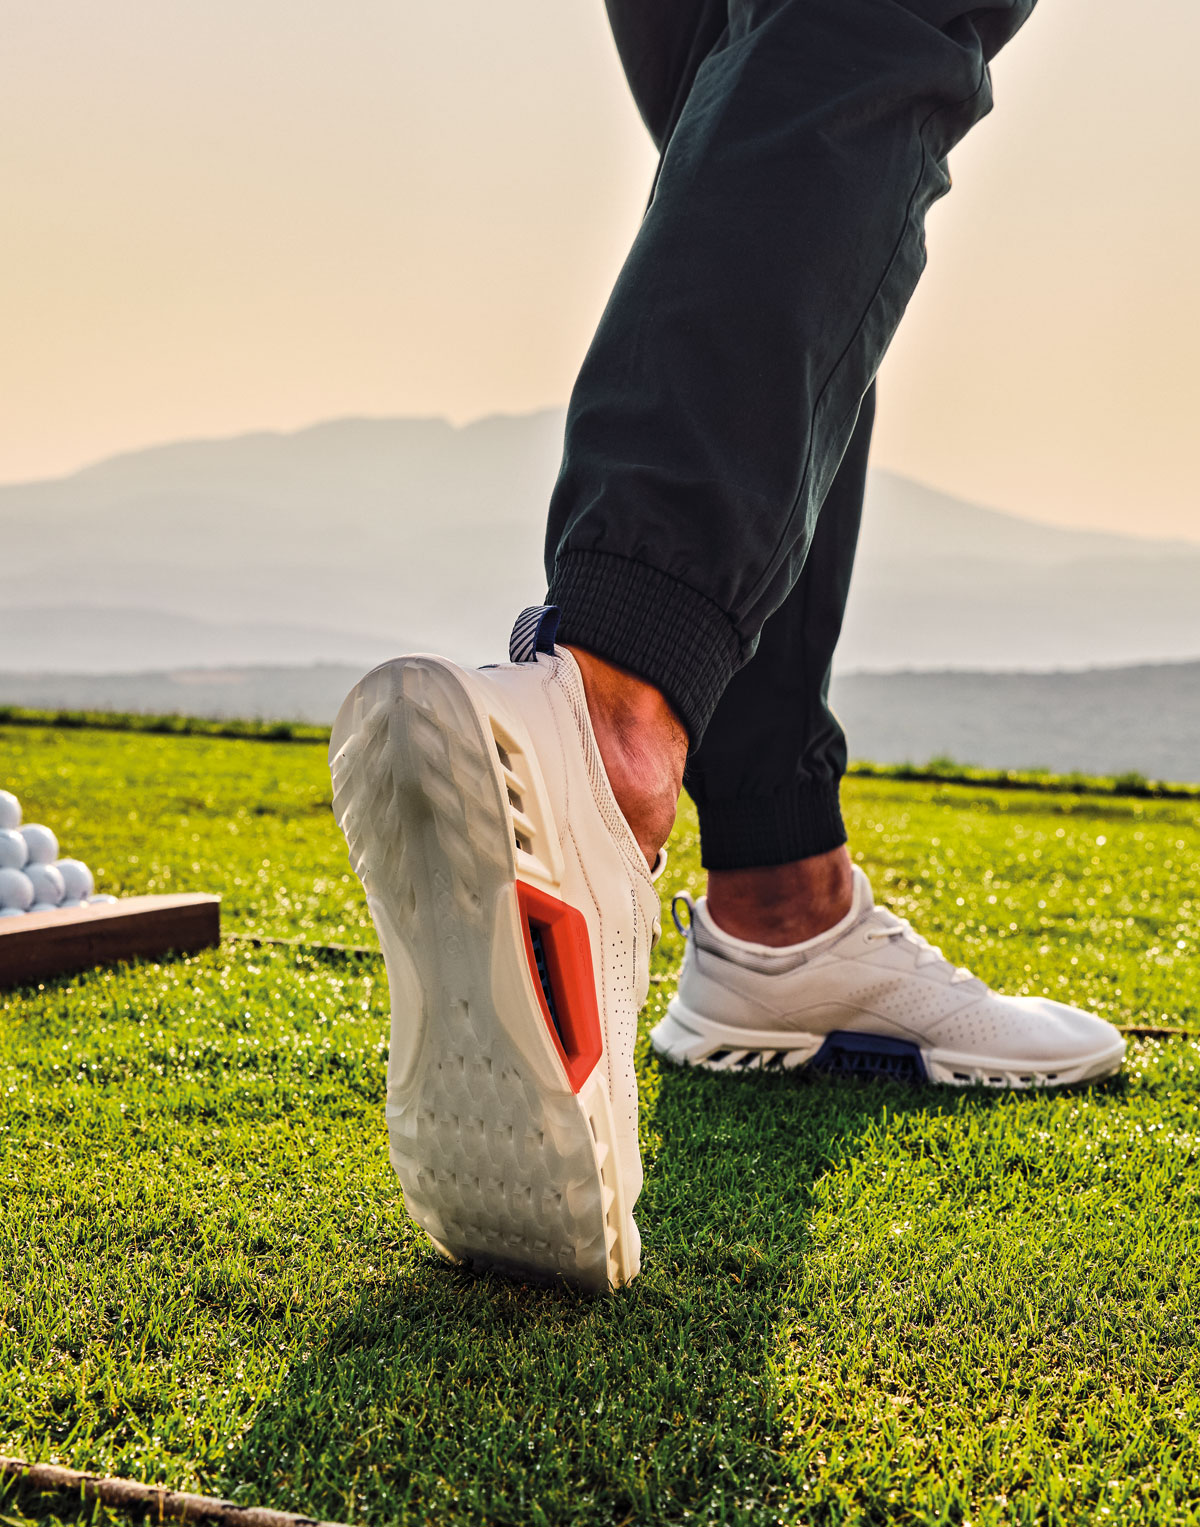 Key Features of Ecco Golf Shoes